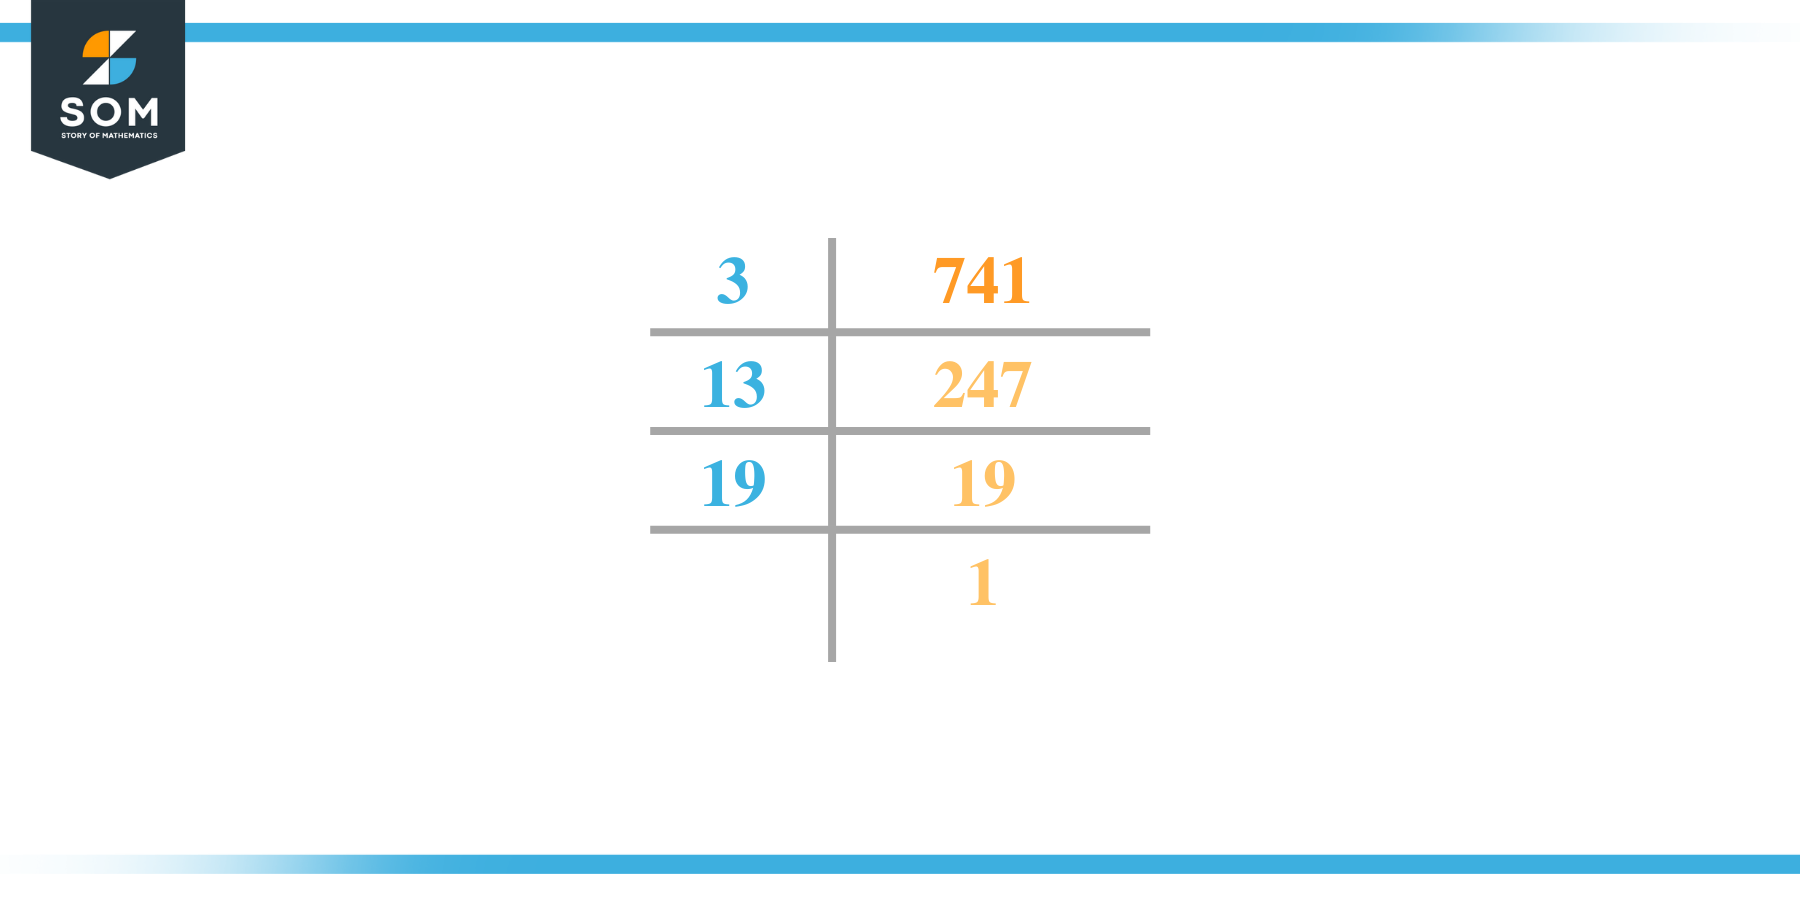 Prime factorization of seven hundred and forty one